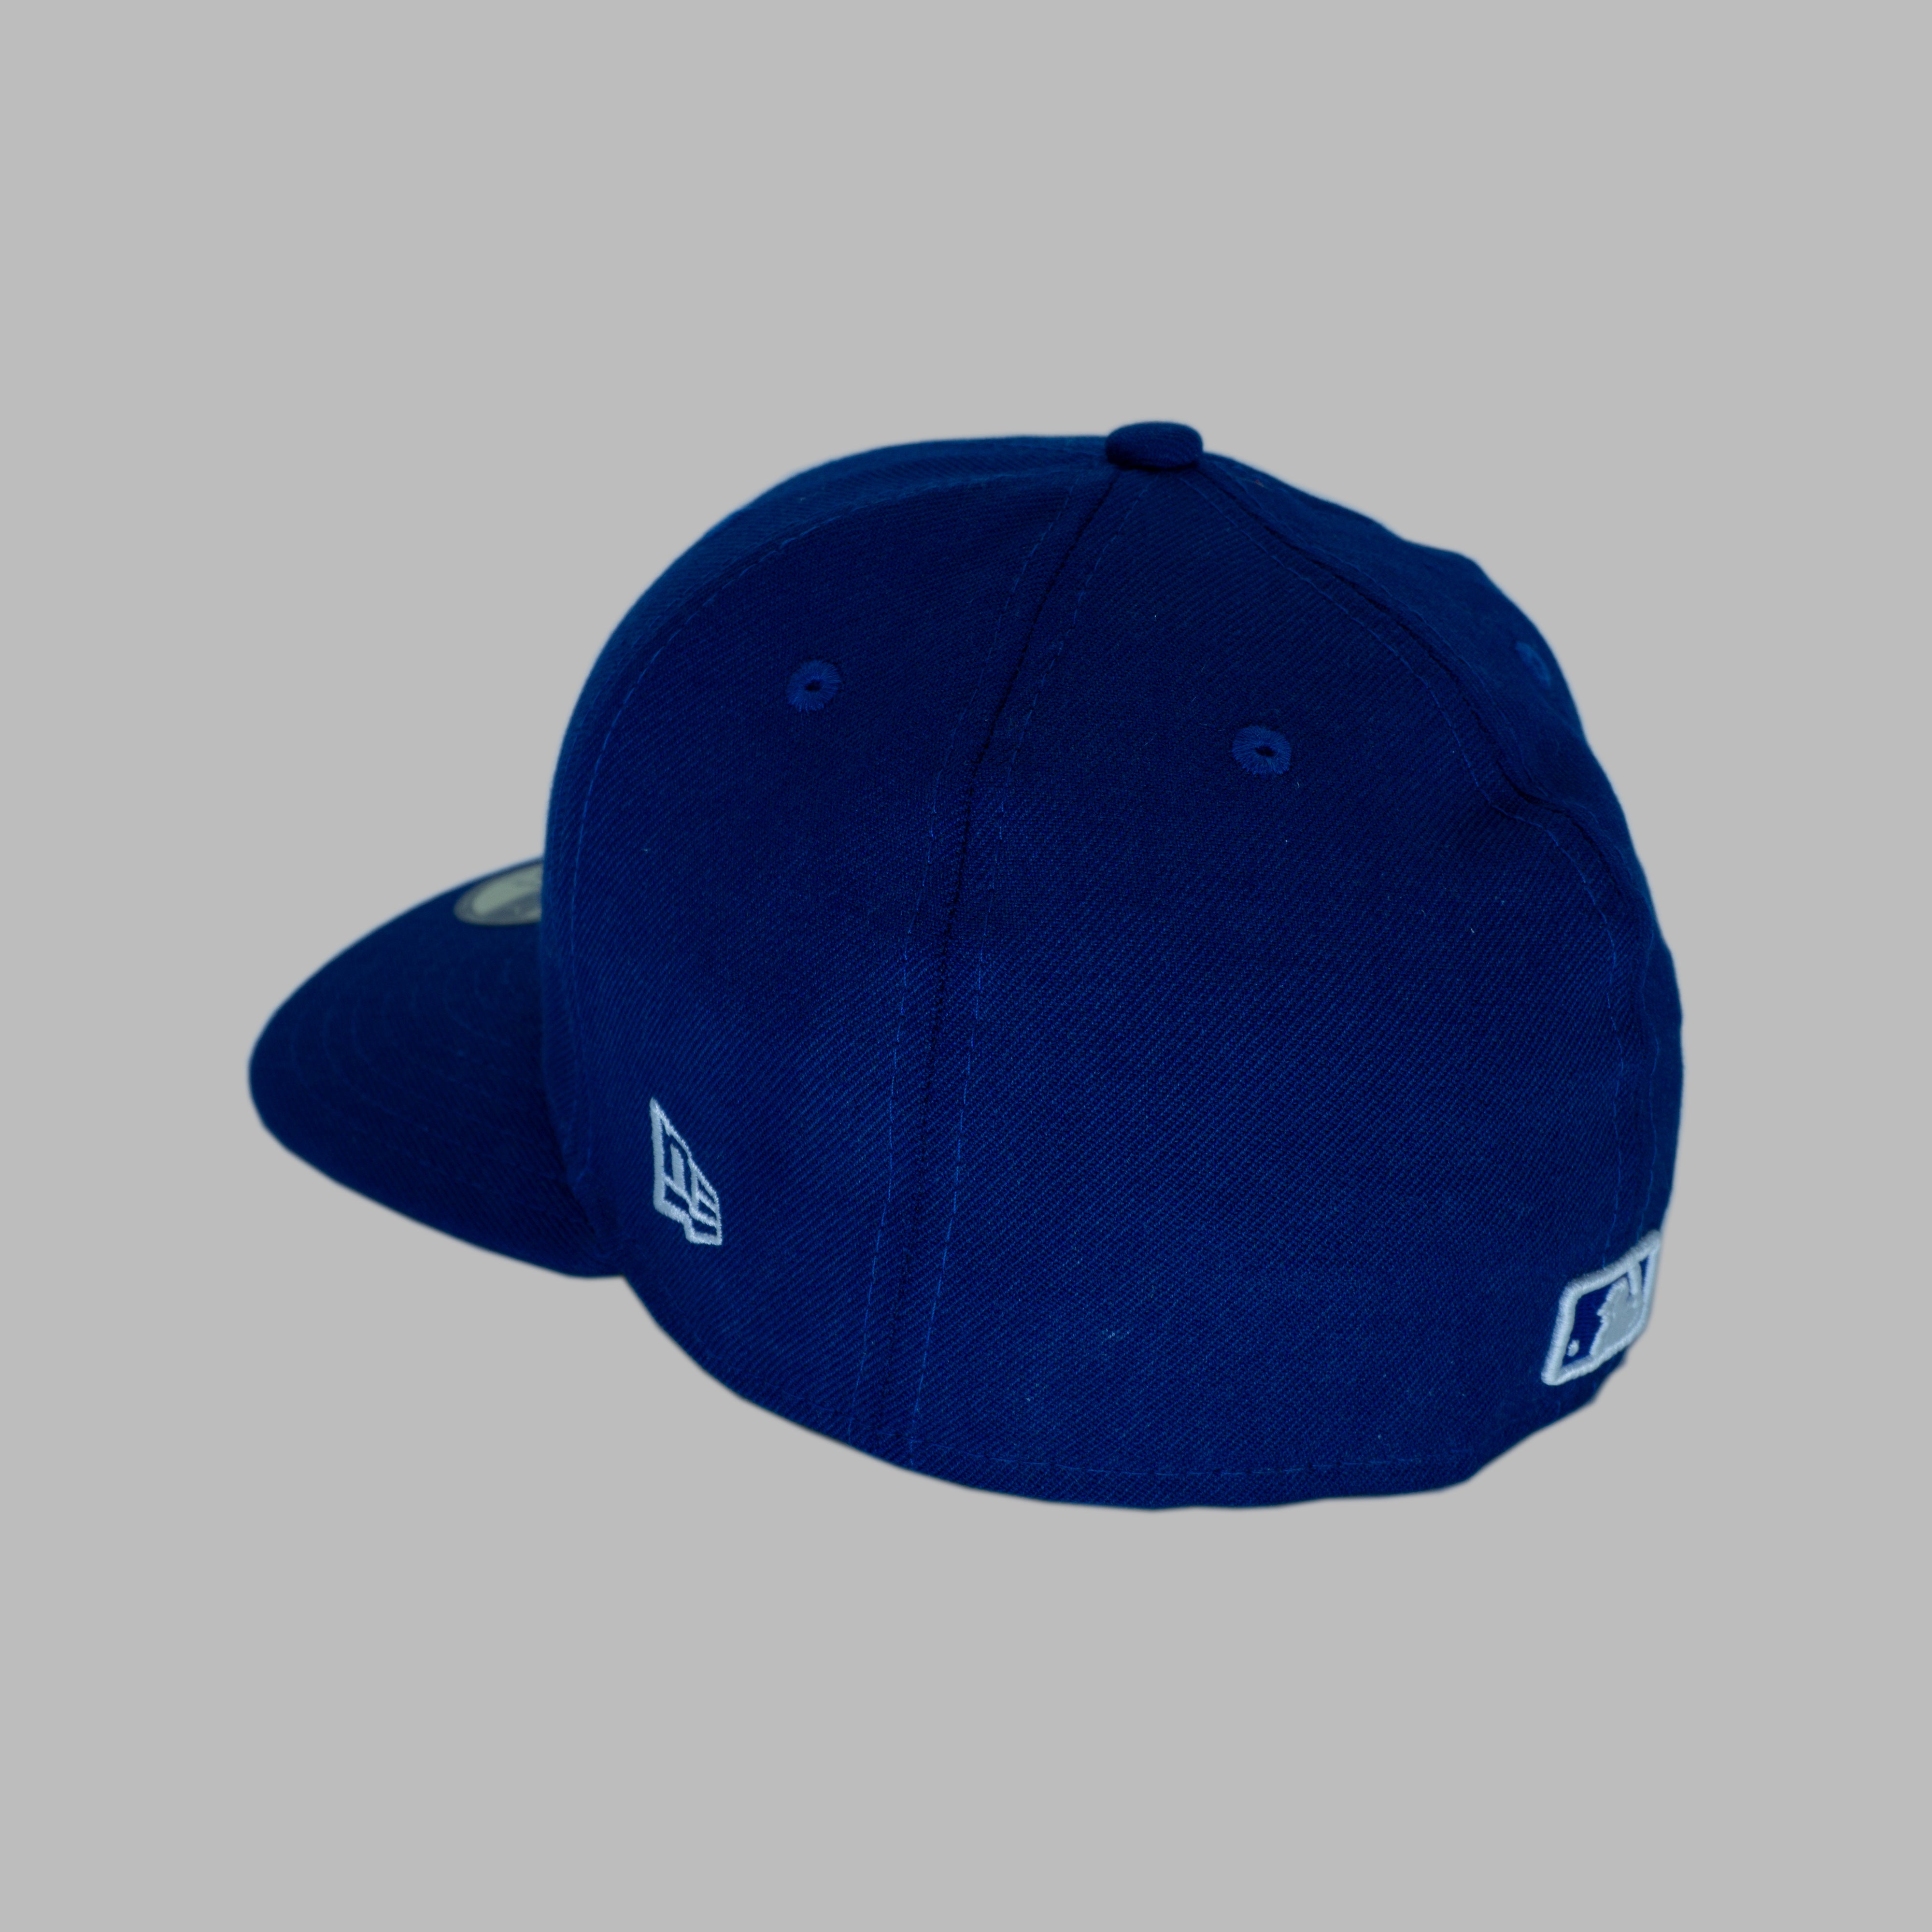 BLUE 2FACED FITTED (size 7 3/8)